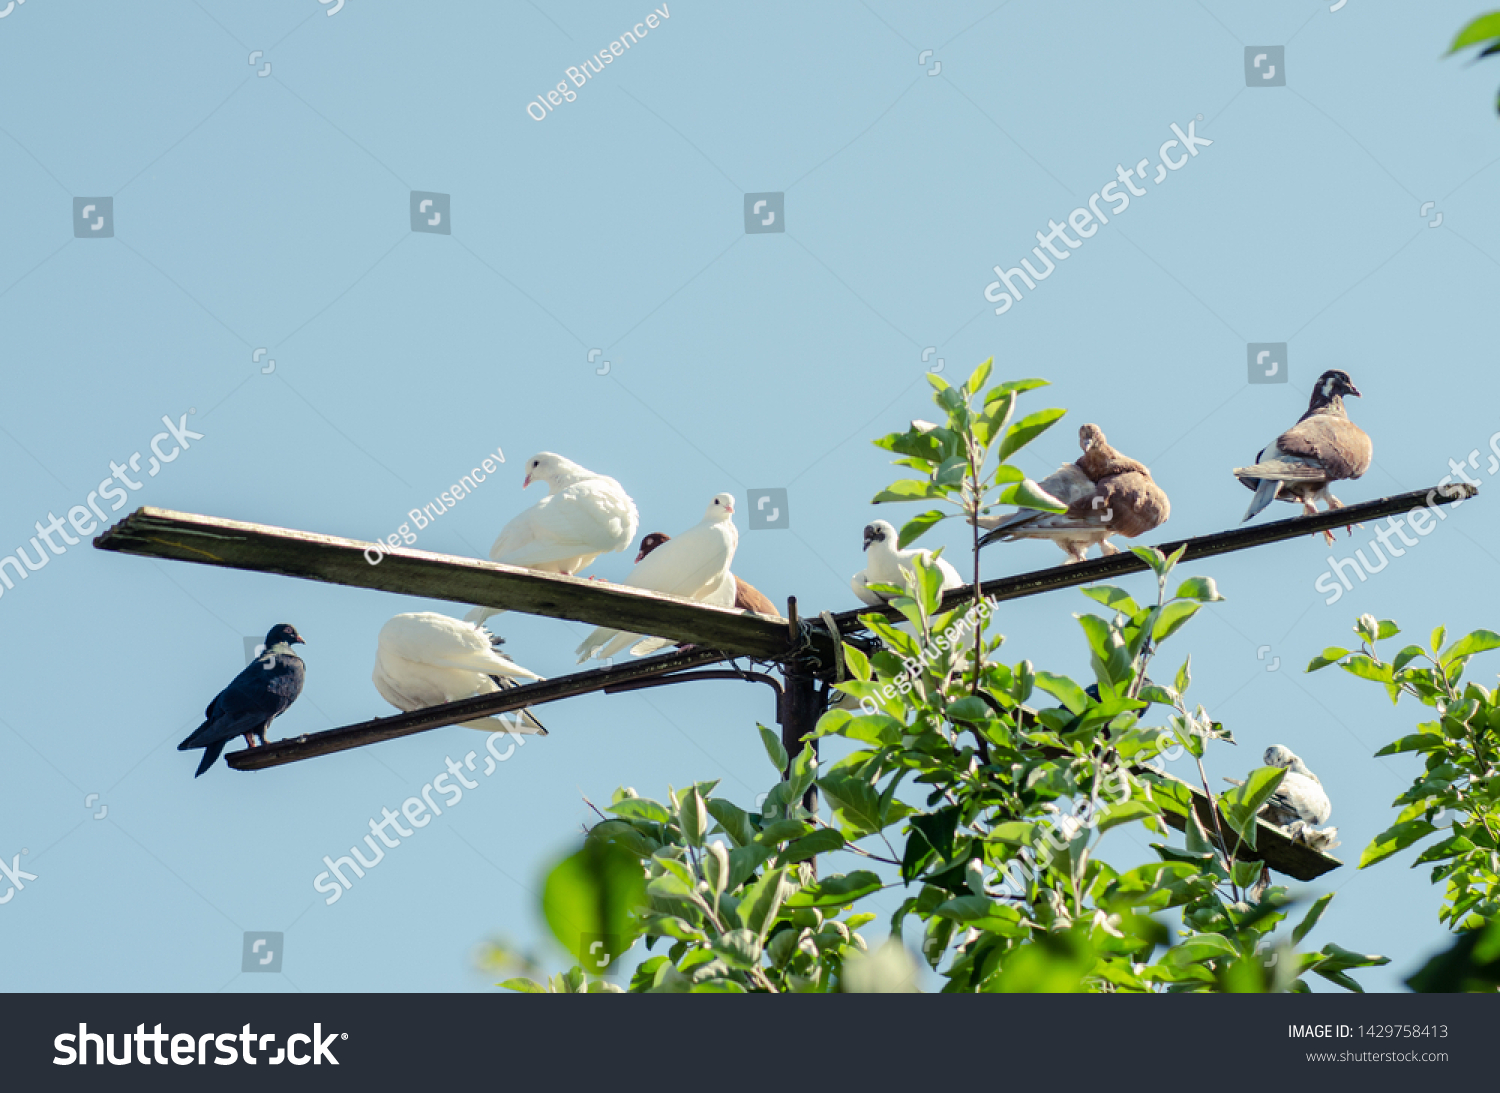 pigeons perched on a perch #1429758413